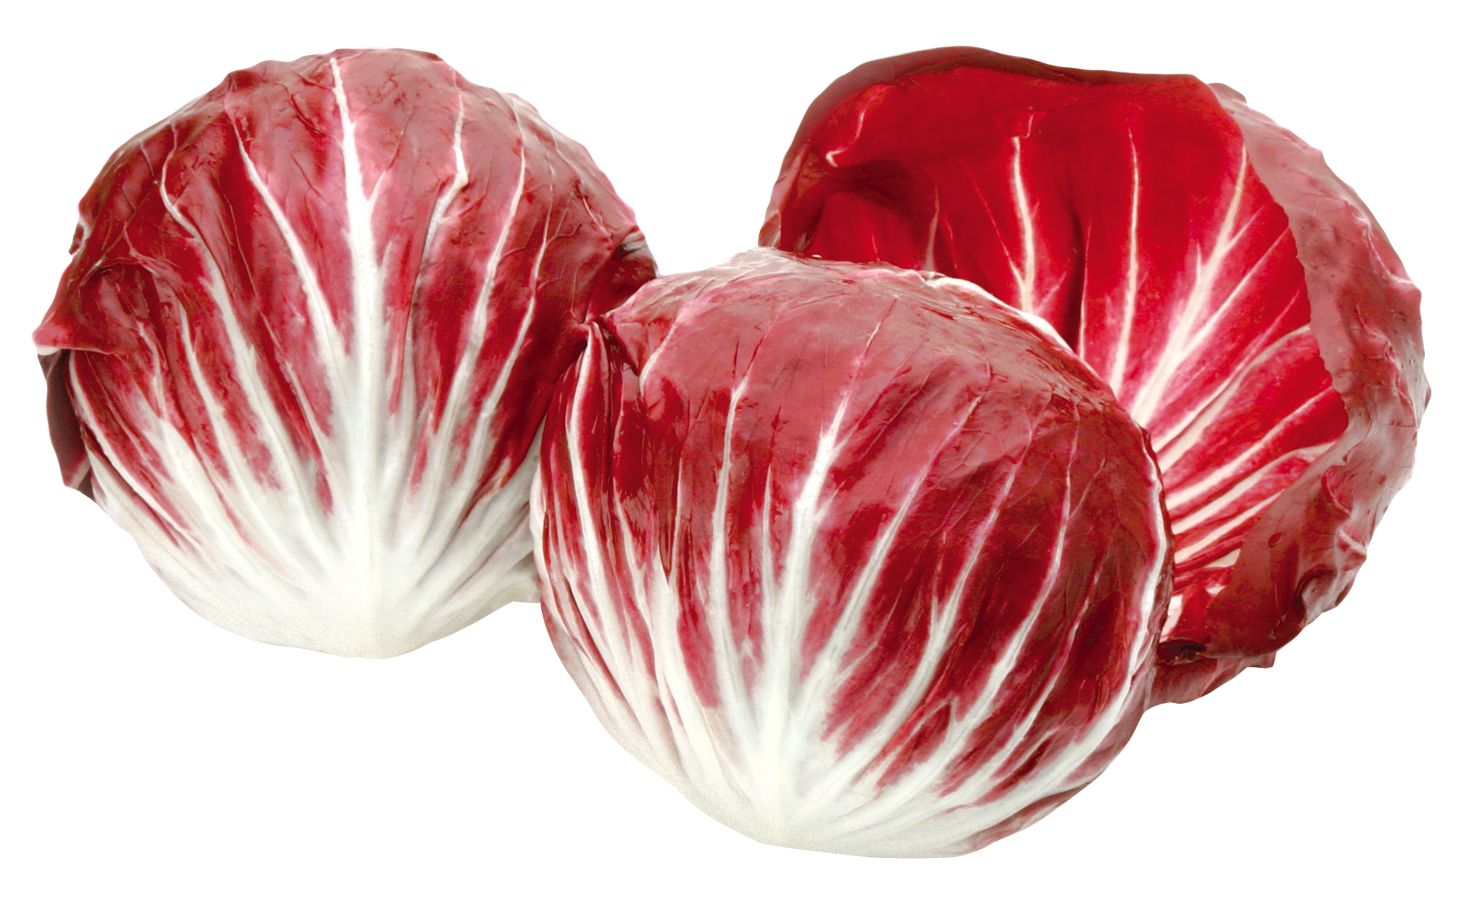 A Group Of Red And White Cabbages